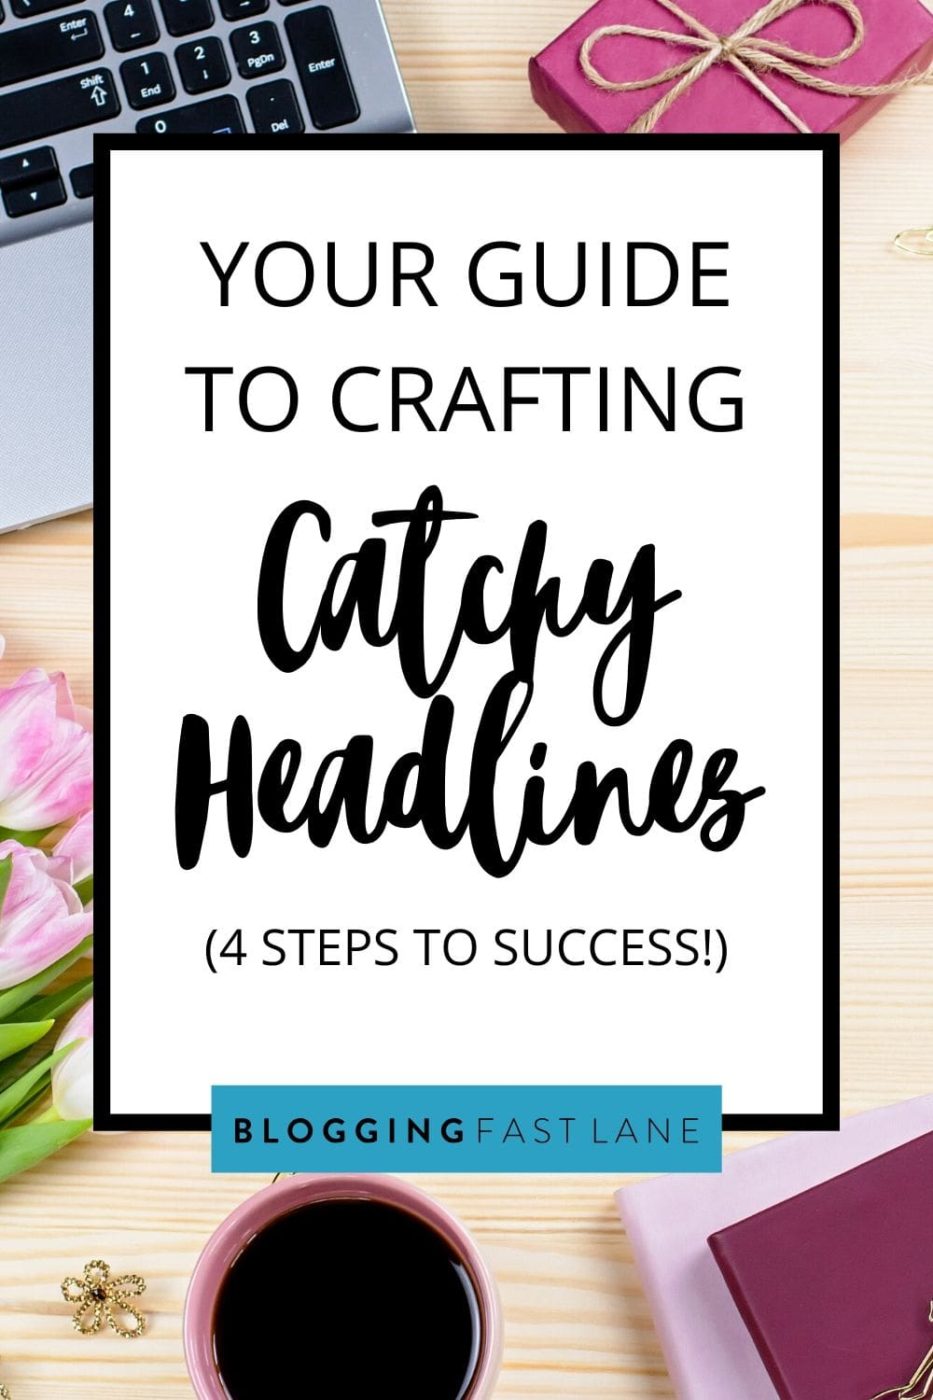 How to Write Catchy Headlines | Spice up your articles and increase traffic by writing catchy headlines. Don't know how? Check out our article that has four steps to follow, plus loads of examples!